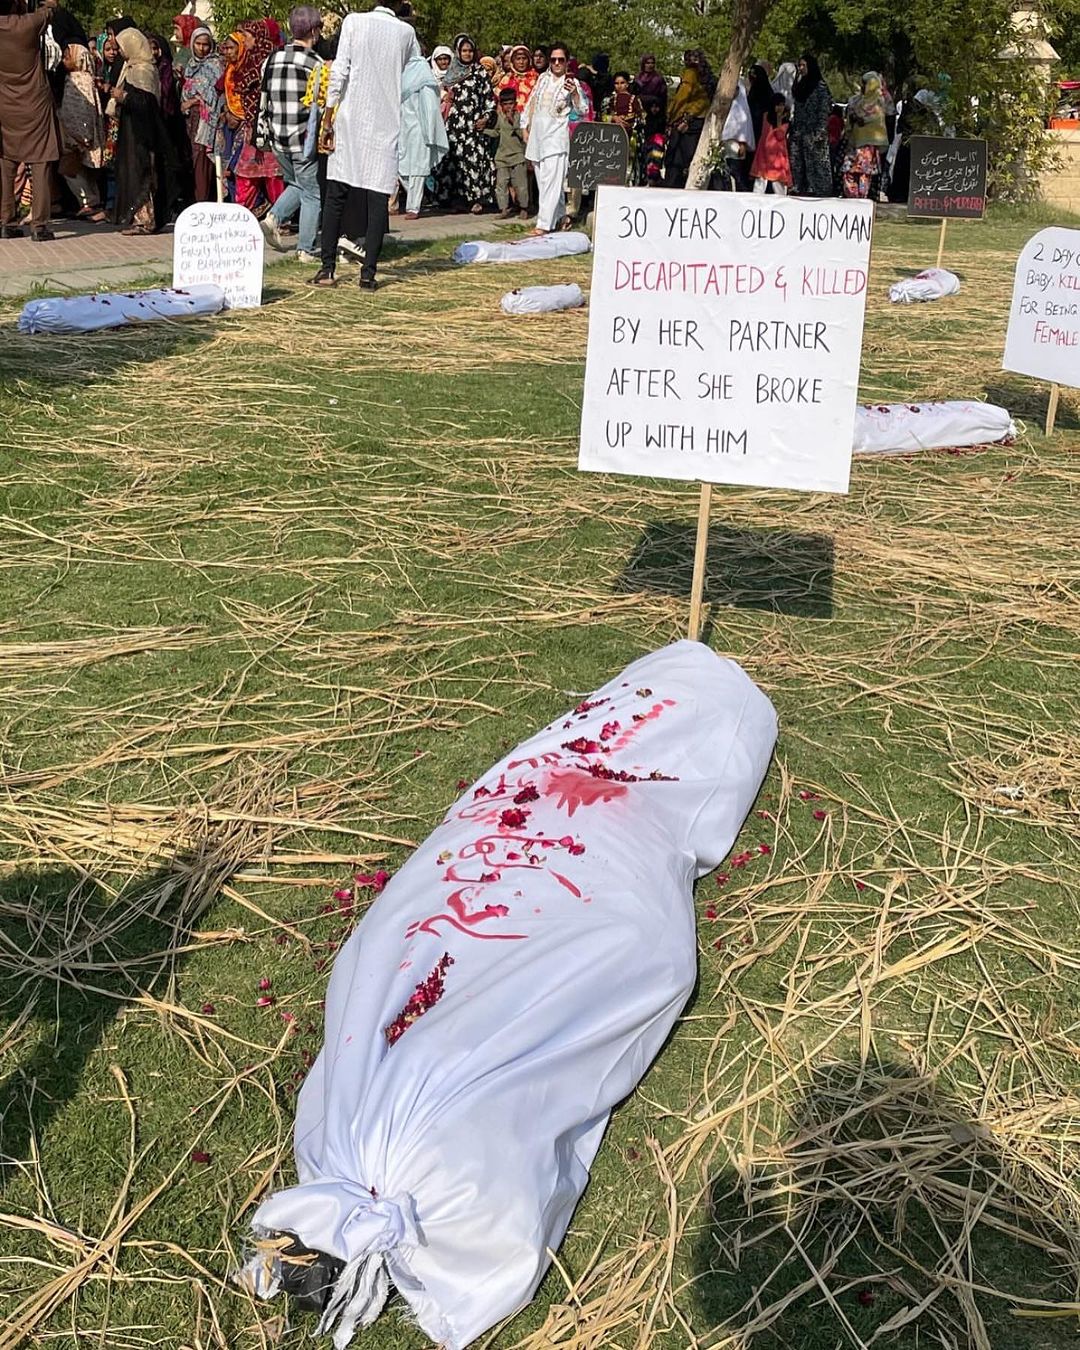 What were the art installations on Aurat March all about?